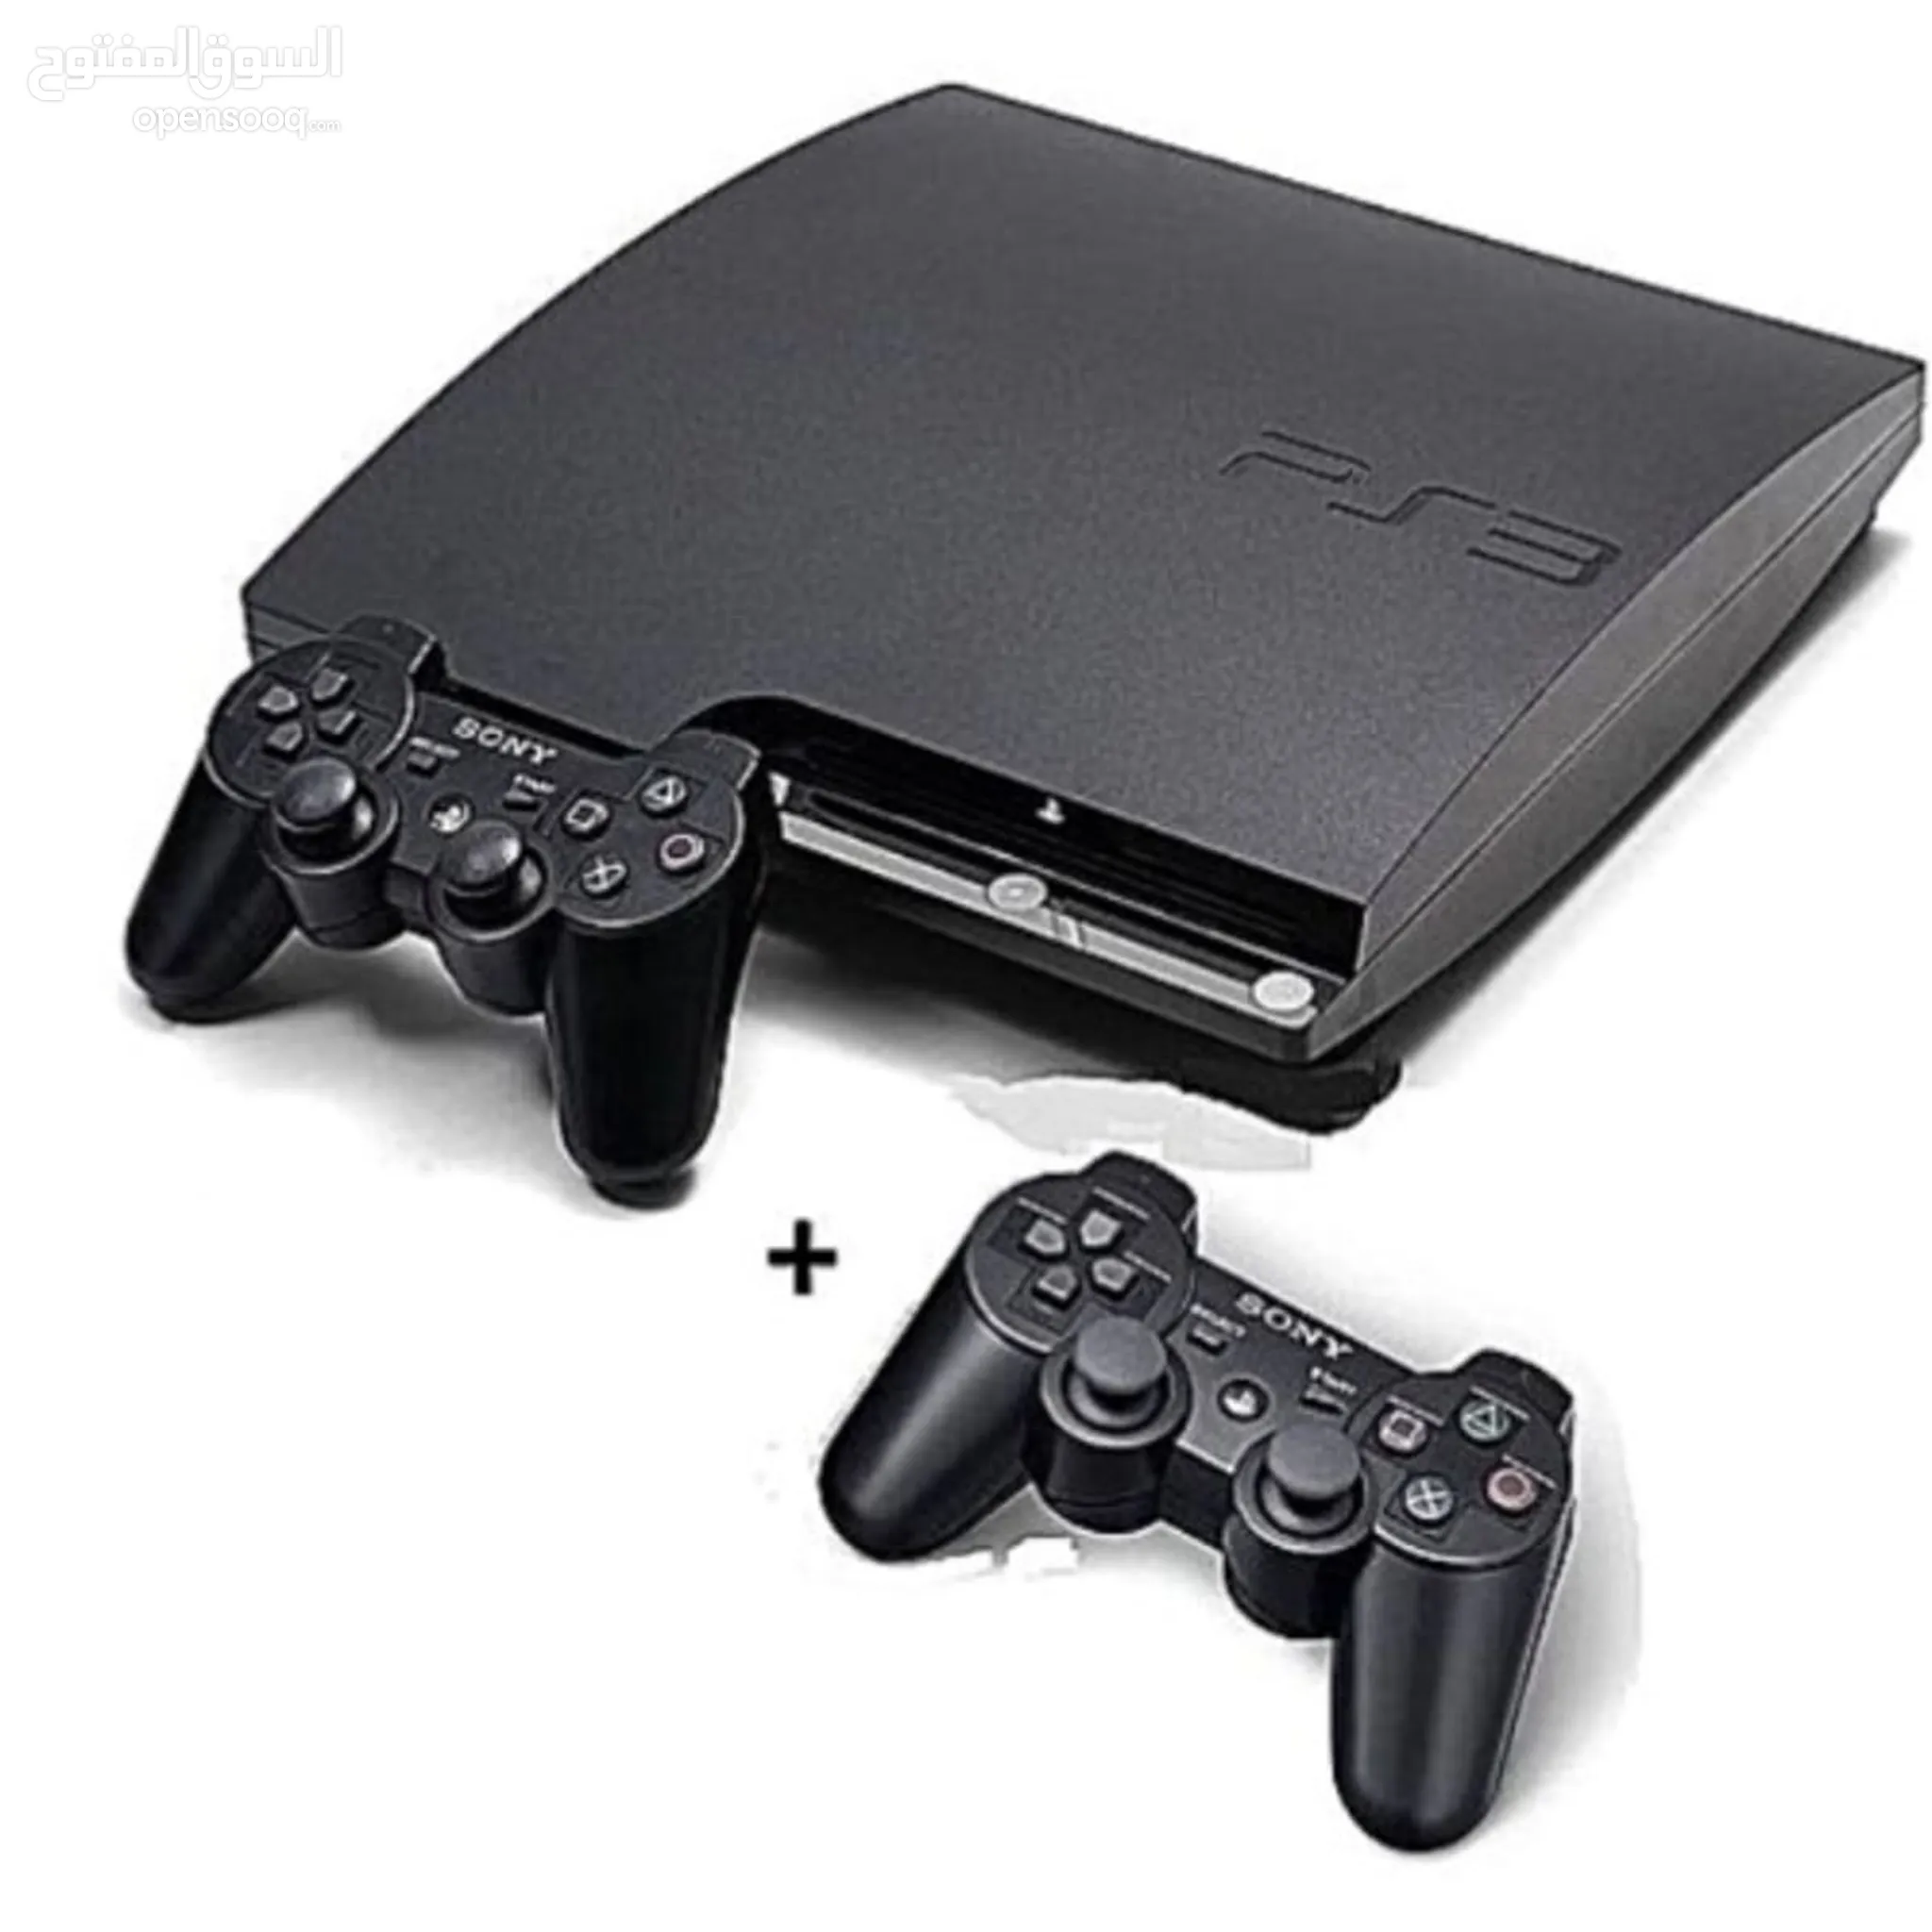 New ps3. Sony PLAYSTATION 3 Slim. Ps3 PLAYSTATION 3 Sony. Sony PLAYSTATION 3 Slim 320gb. Sony PLAYSTATION 3 Slim 3 320 ГБ.